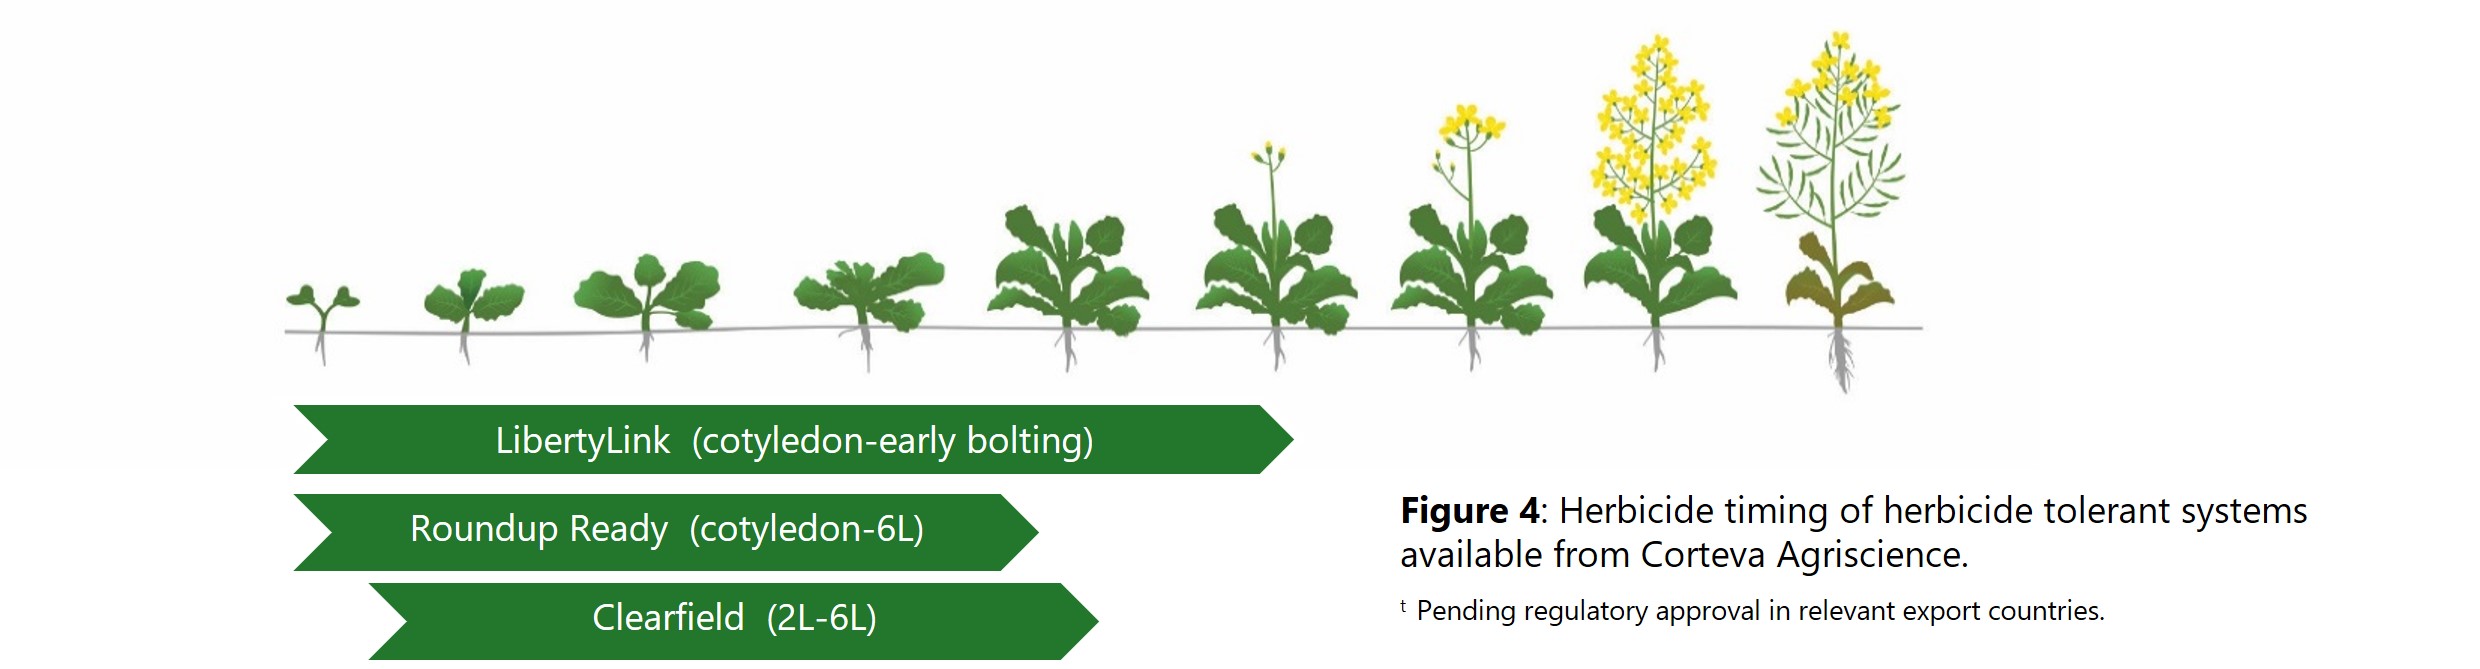 Herbicide timing of herbicide tolerant systems available from Corteva Agriscience.